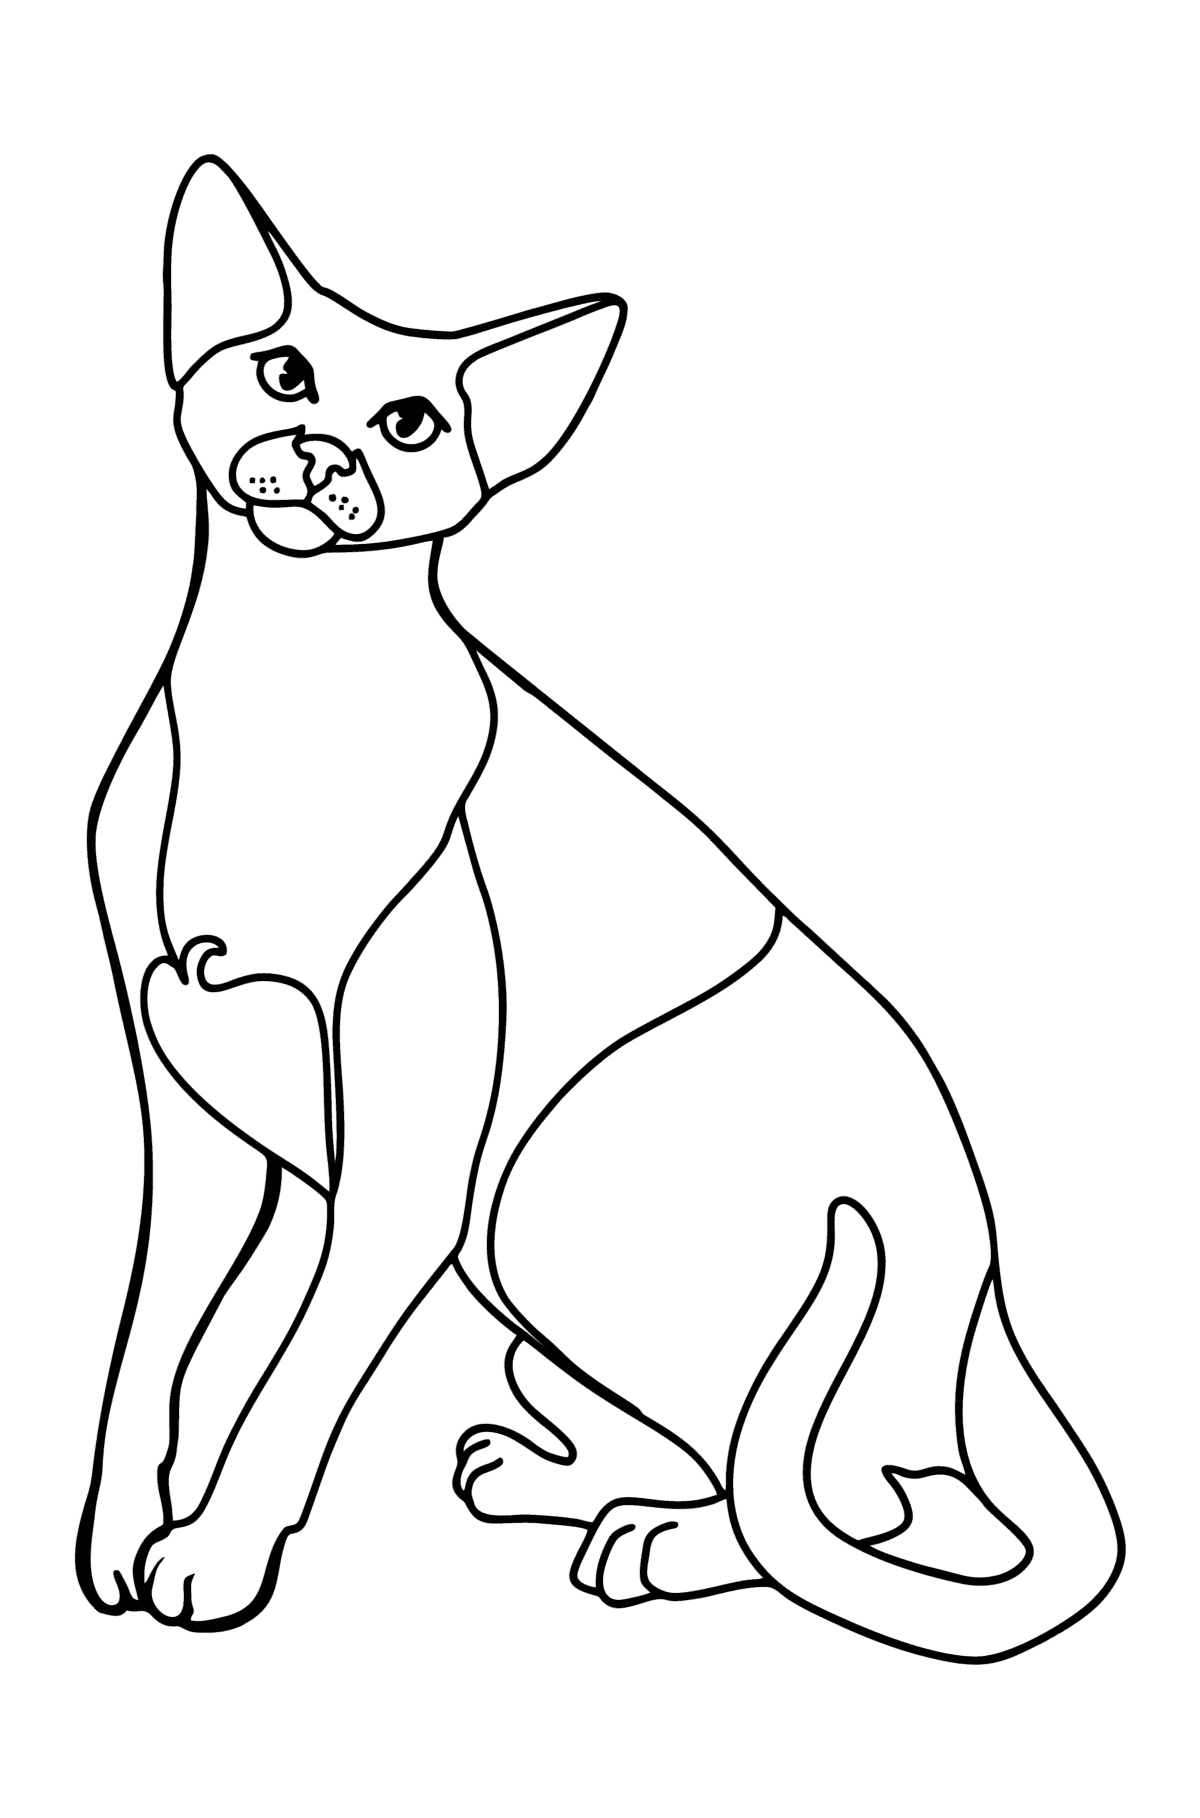 Oriental Shorthair Cat coloring page - Coloring Pages for Kids